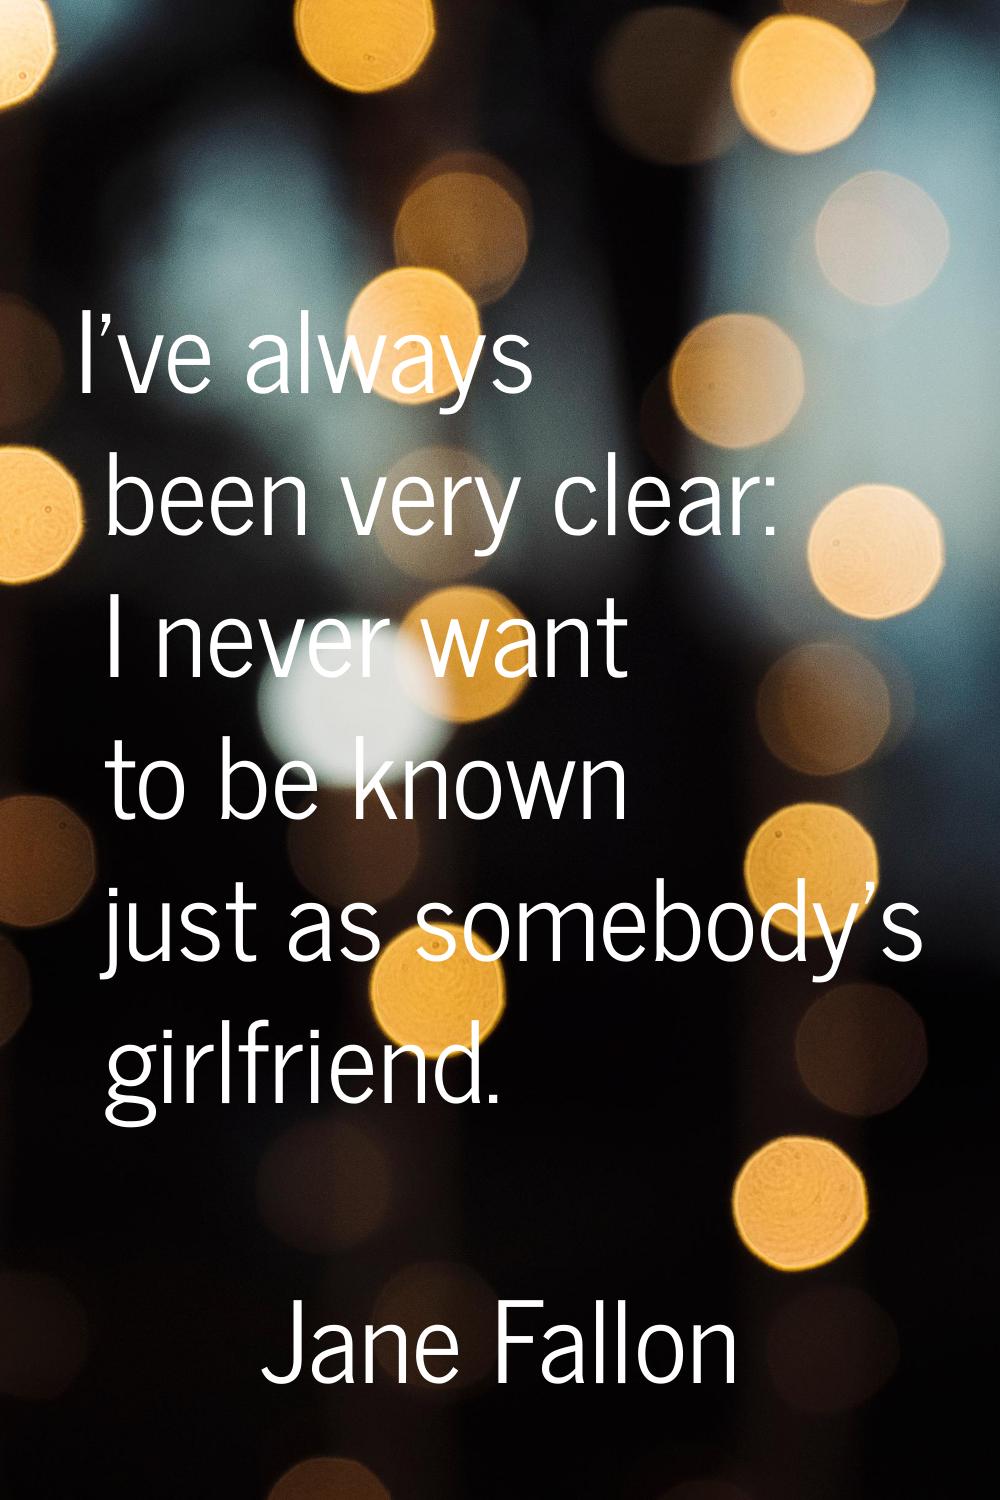 I've always been very clear: I never want to be known just as somebody's girlfriend.